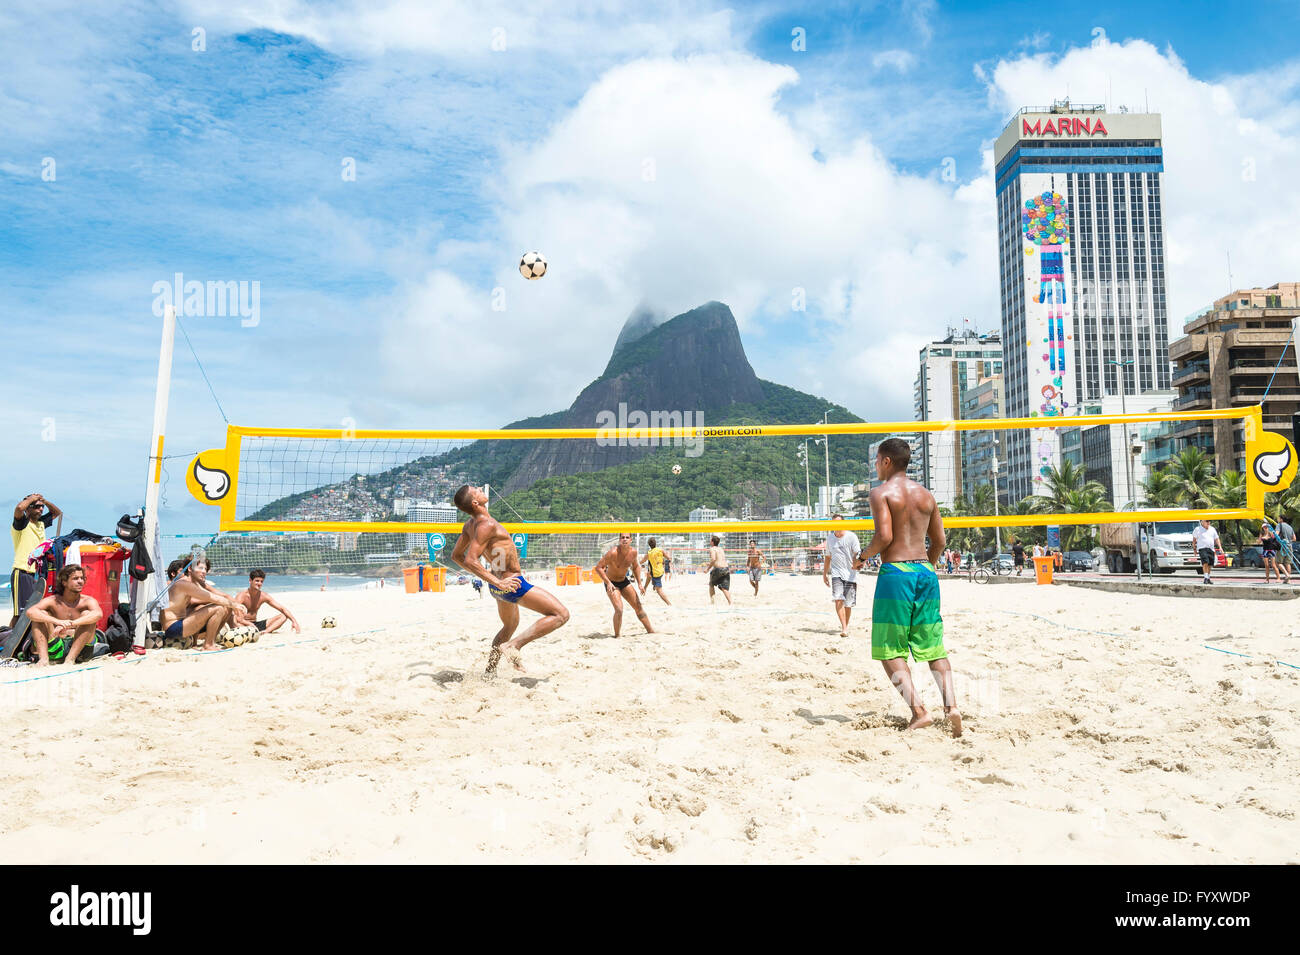 RIO DE JANEIRO - MARCH 17, 2016: Brazilians play a game of futevolei (footvolley), a sport combining football and volleyball. Stock Photo